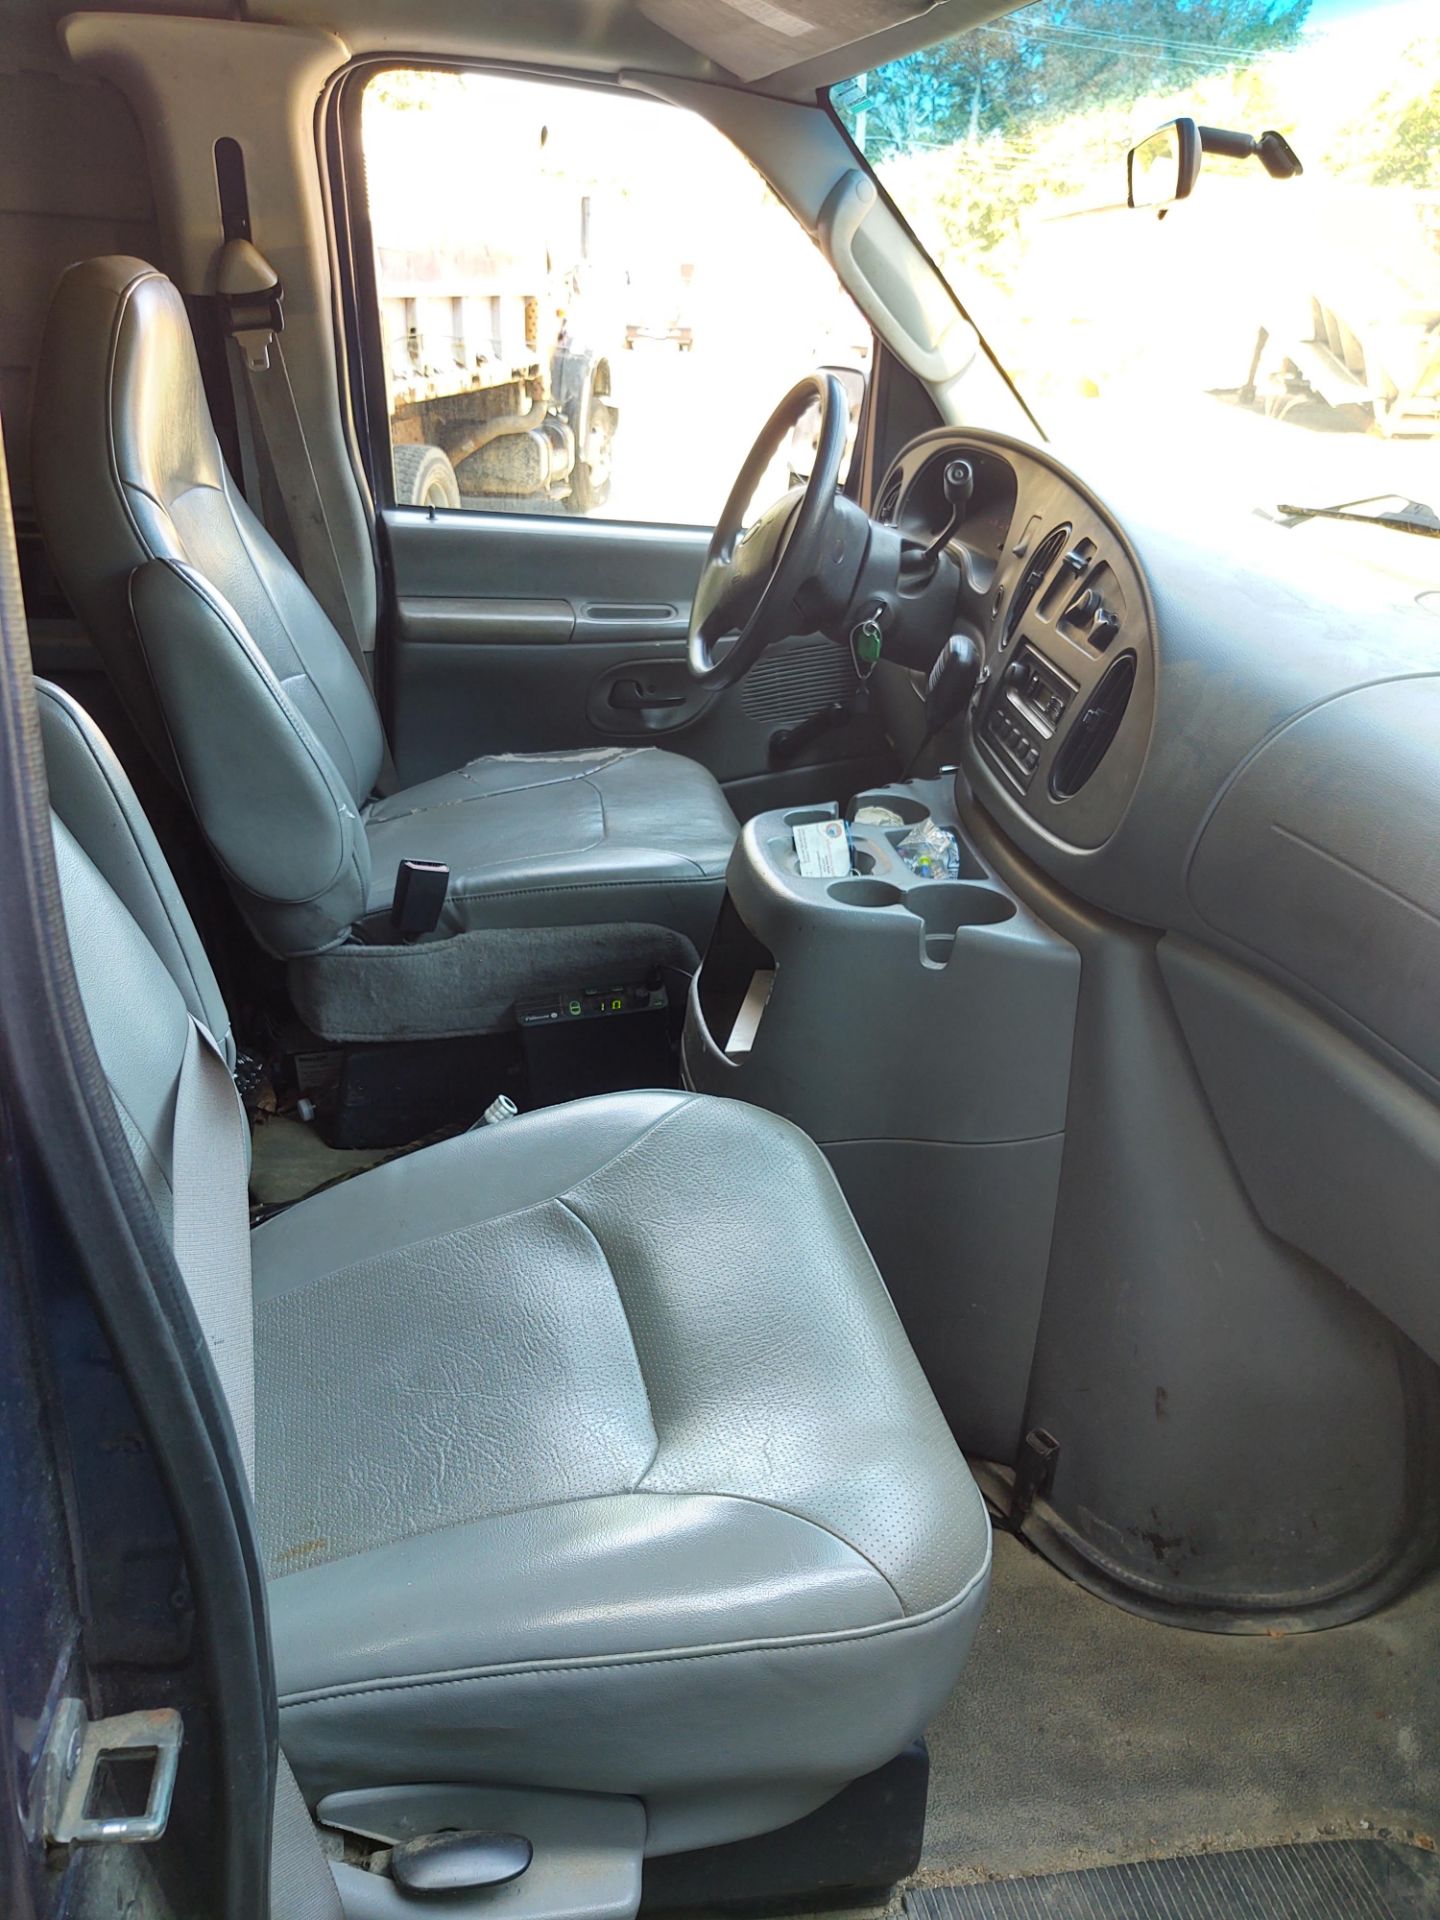 2004 Ford E150 Cargo Van Odom: NA, Rear Barn Doors w/ Glass and Side Door w/ Glass, VIN: - Image 6 of 8